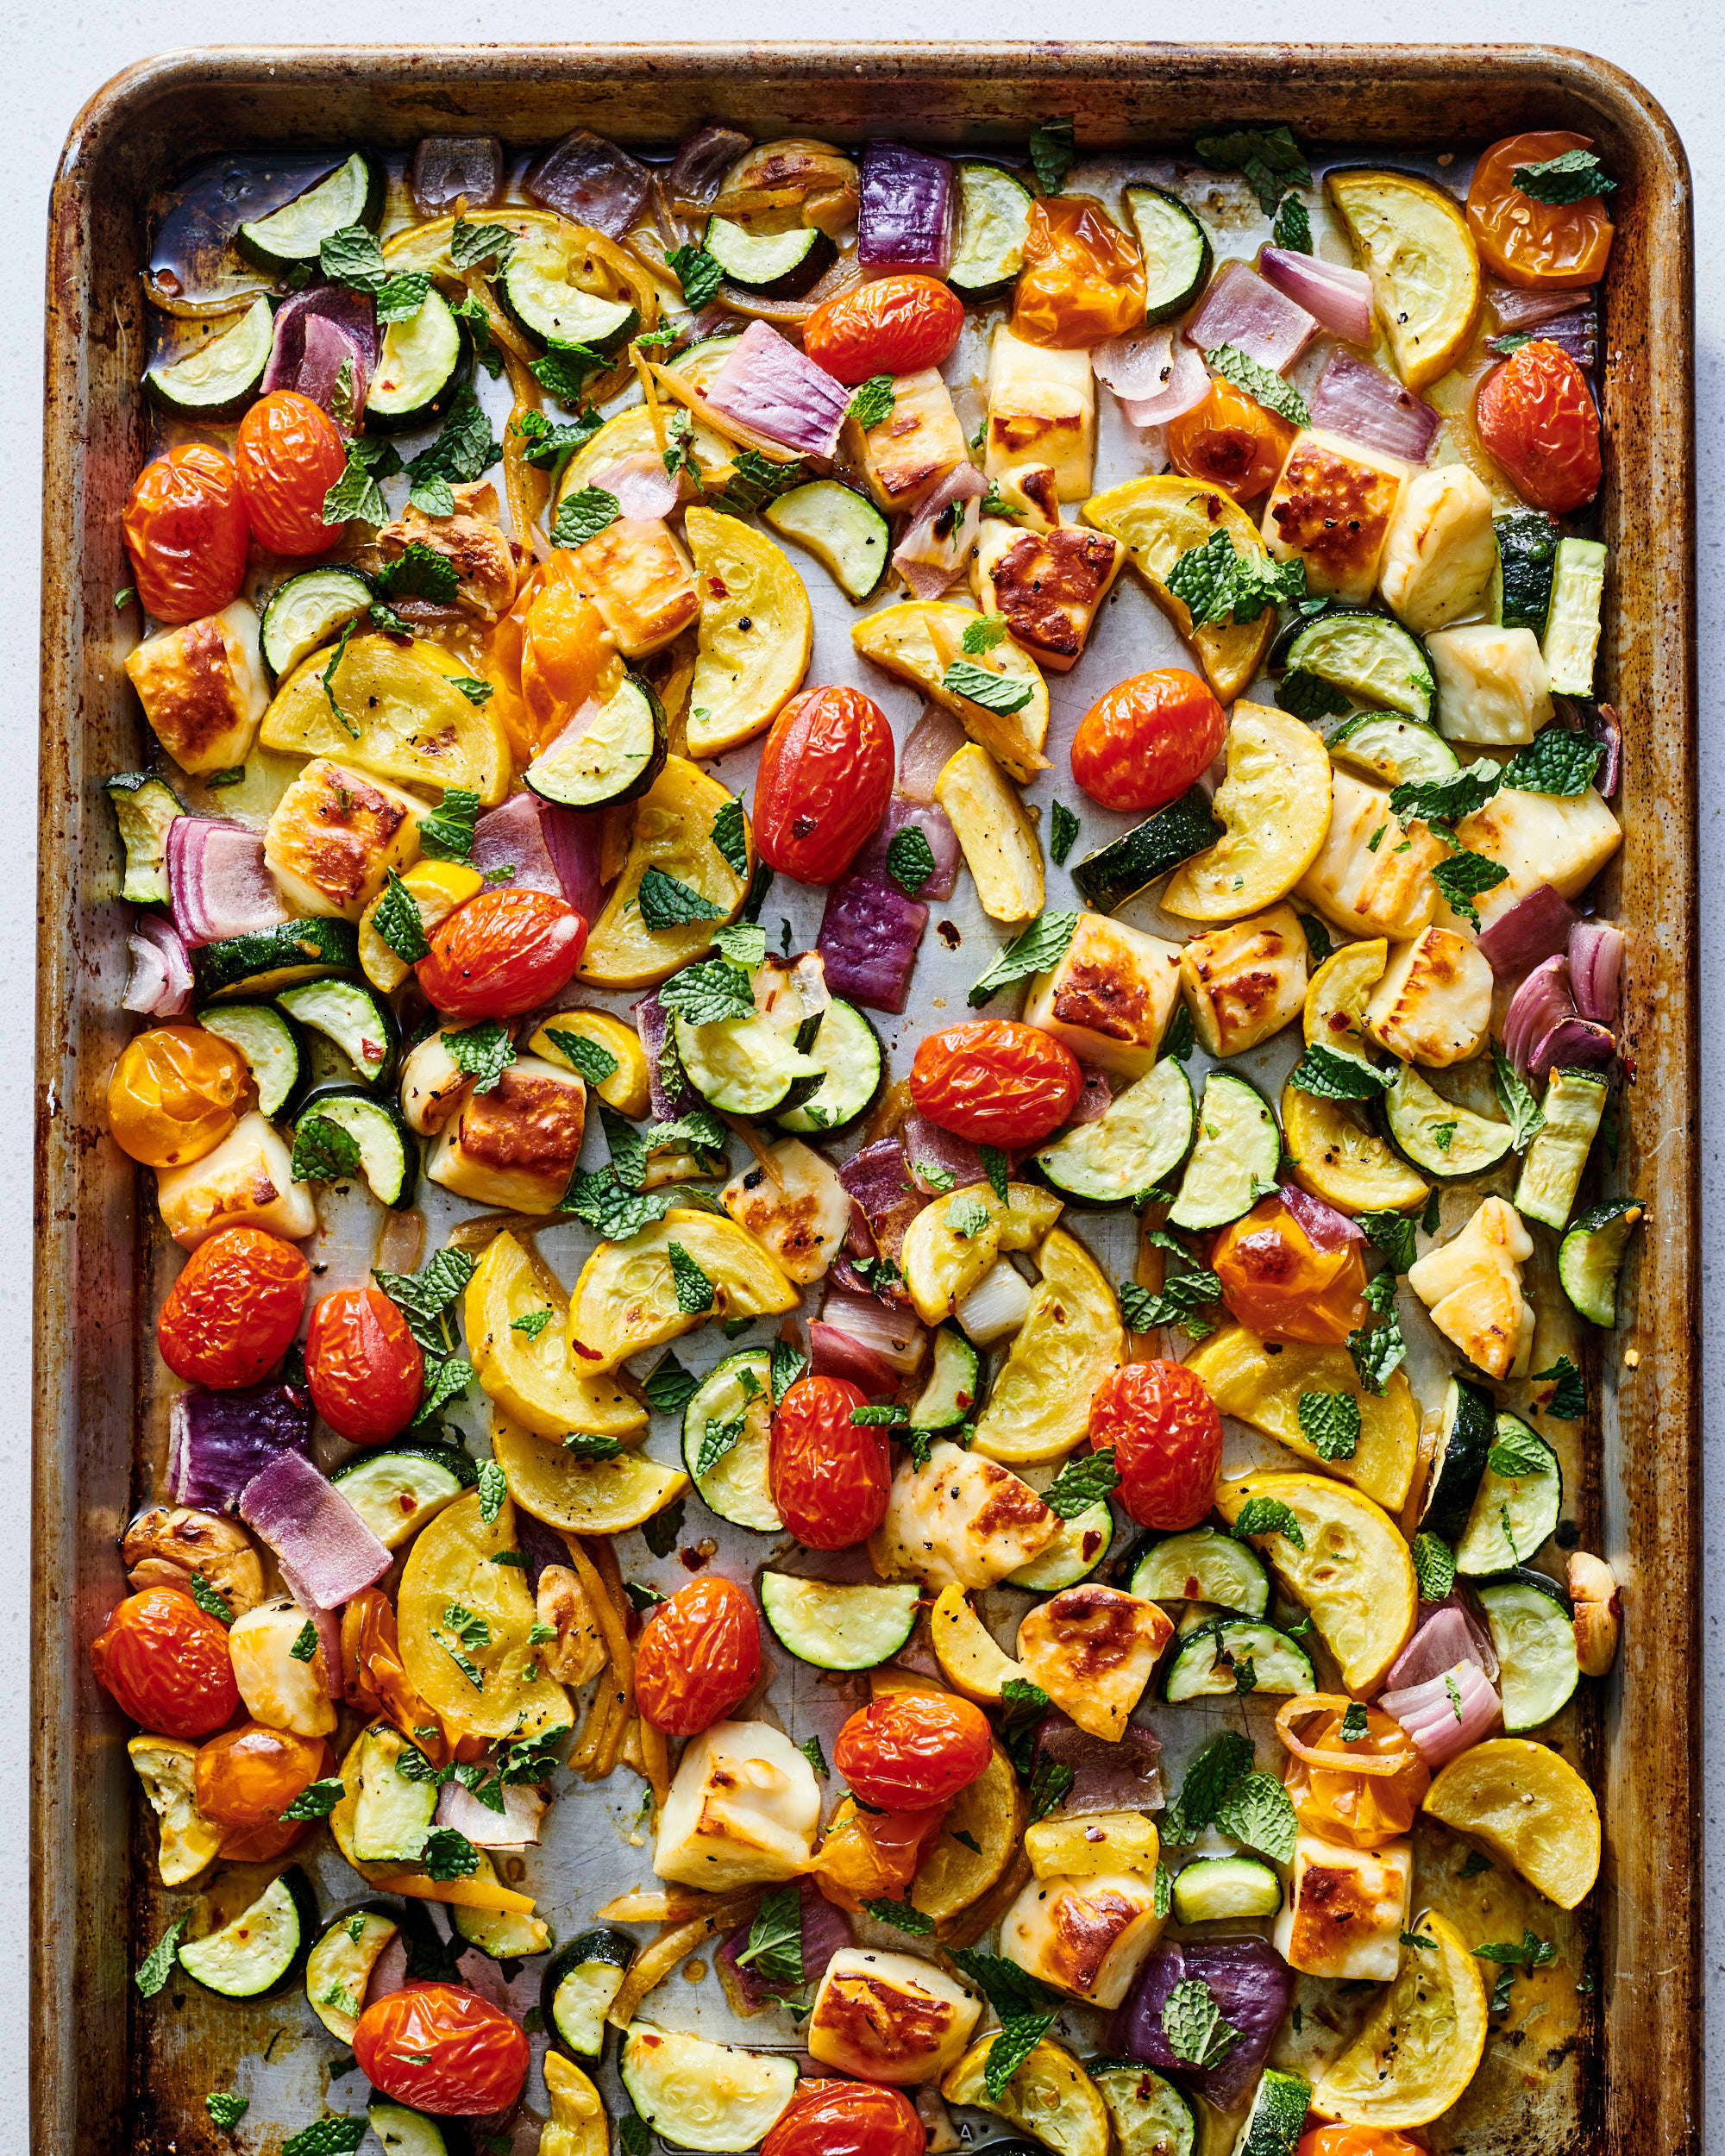 13 Sheet Pan Dinners to Enjoy Any Night of the Week